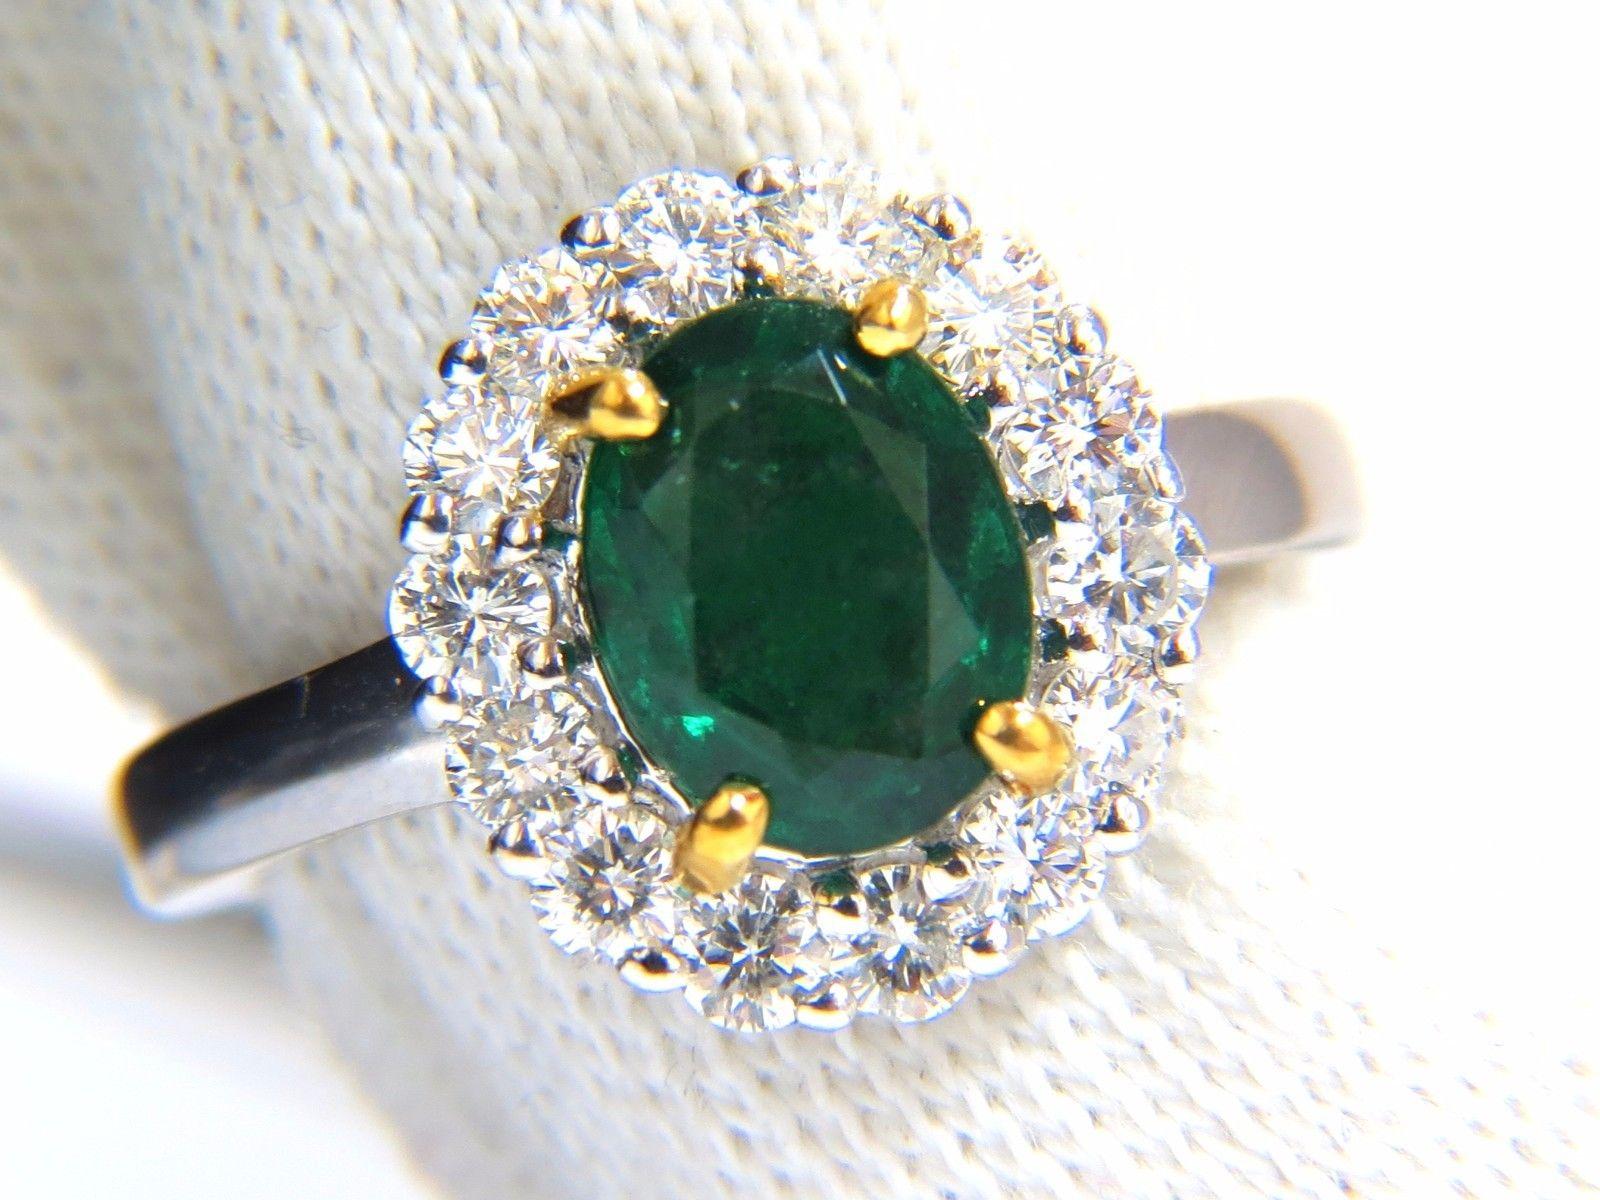 Halo Green.

1.66ct. Natural Emerald Ring

8.6 X 6.7mm

Full cut oval brilliant 

Clean Clarity & Transparent

Vivid Green / Zambia Best



.80ct. Diamonds.

Round & full cuts 

G-color Vs-2 clarity.

  18kt. white gold

5.5 grams

Ring Current